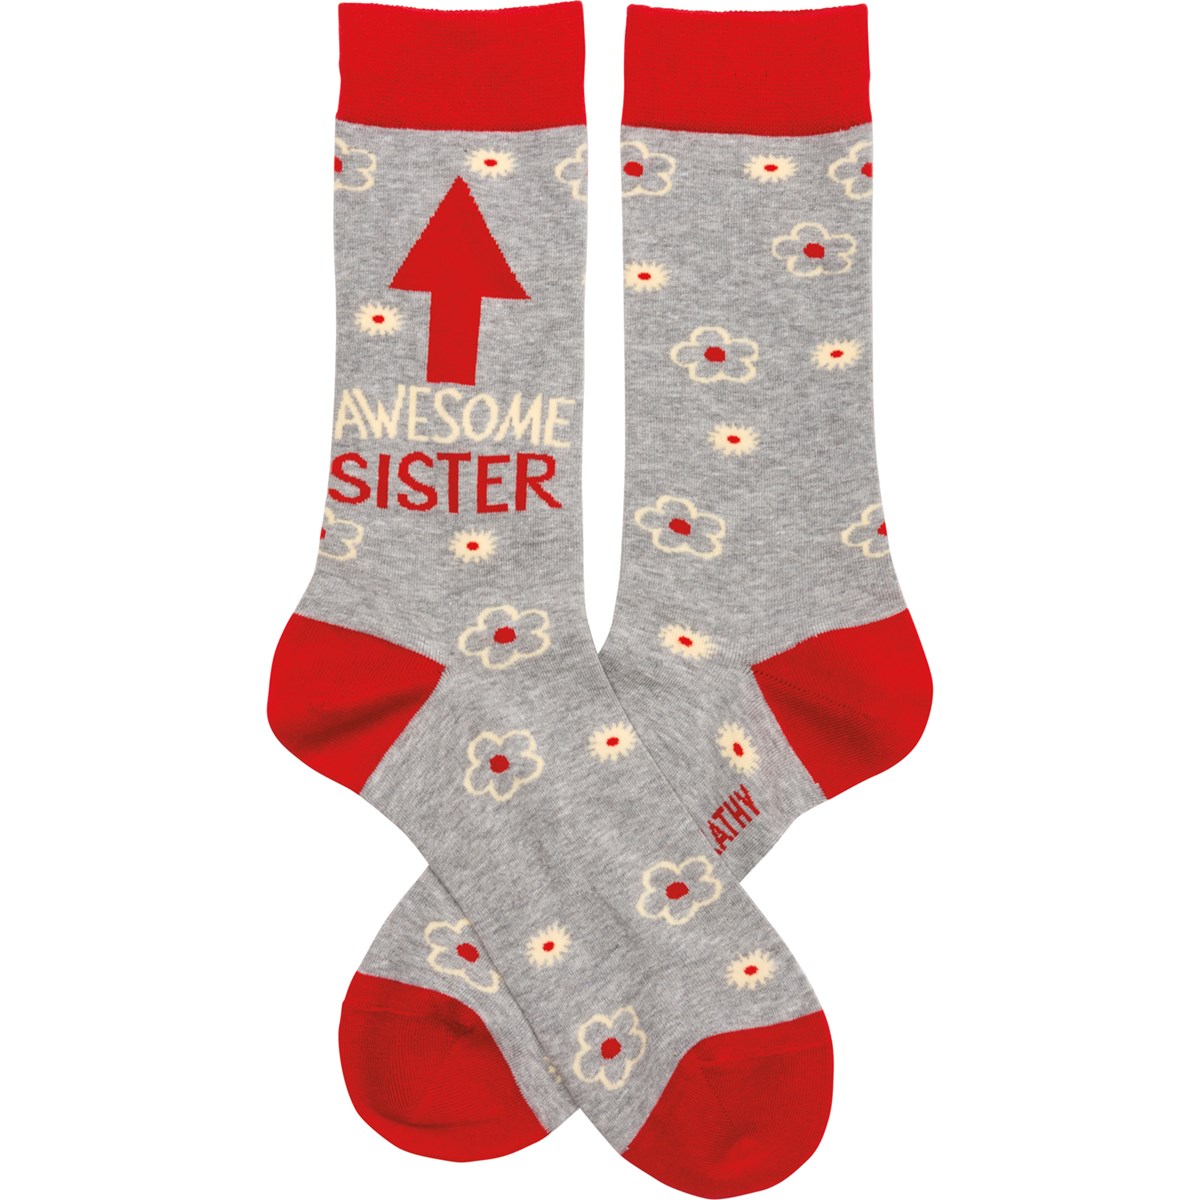 Socks - Awesome Sister - One Size Fits Most - Cotton, Nylon, Spandex